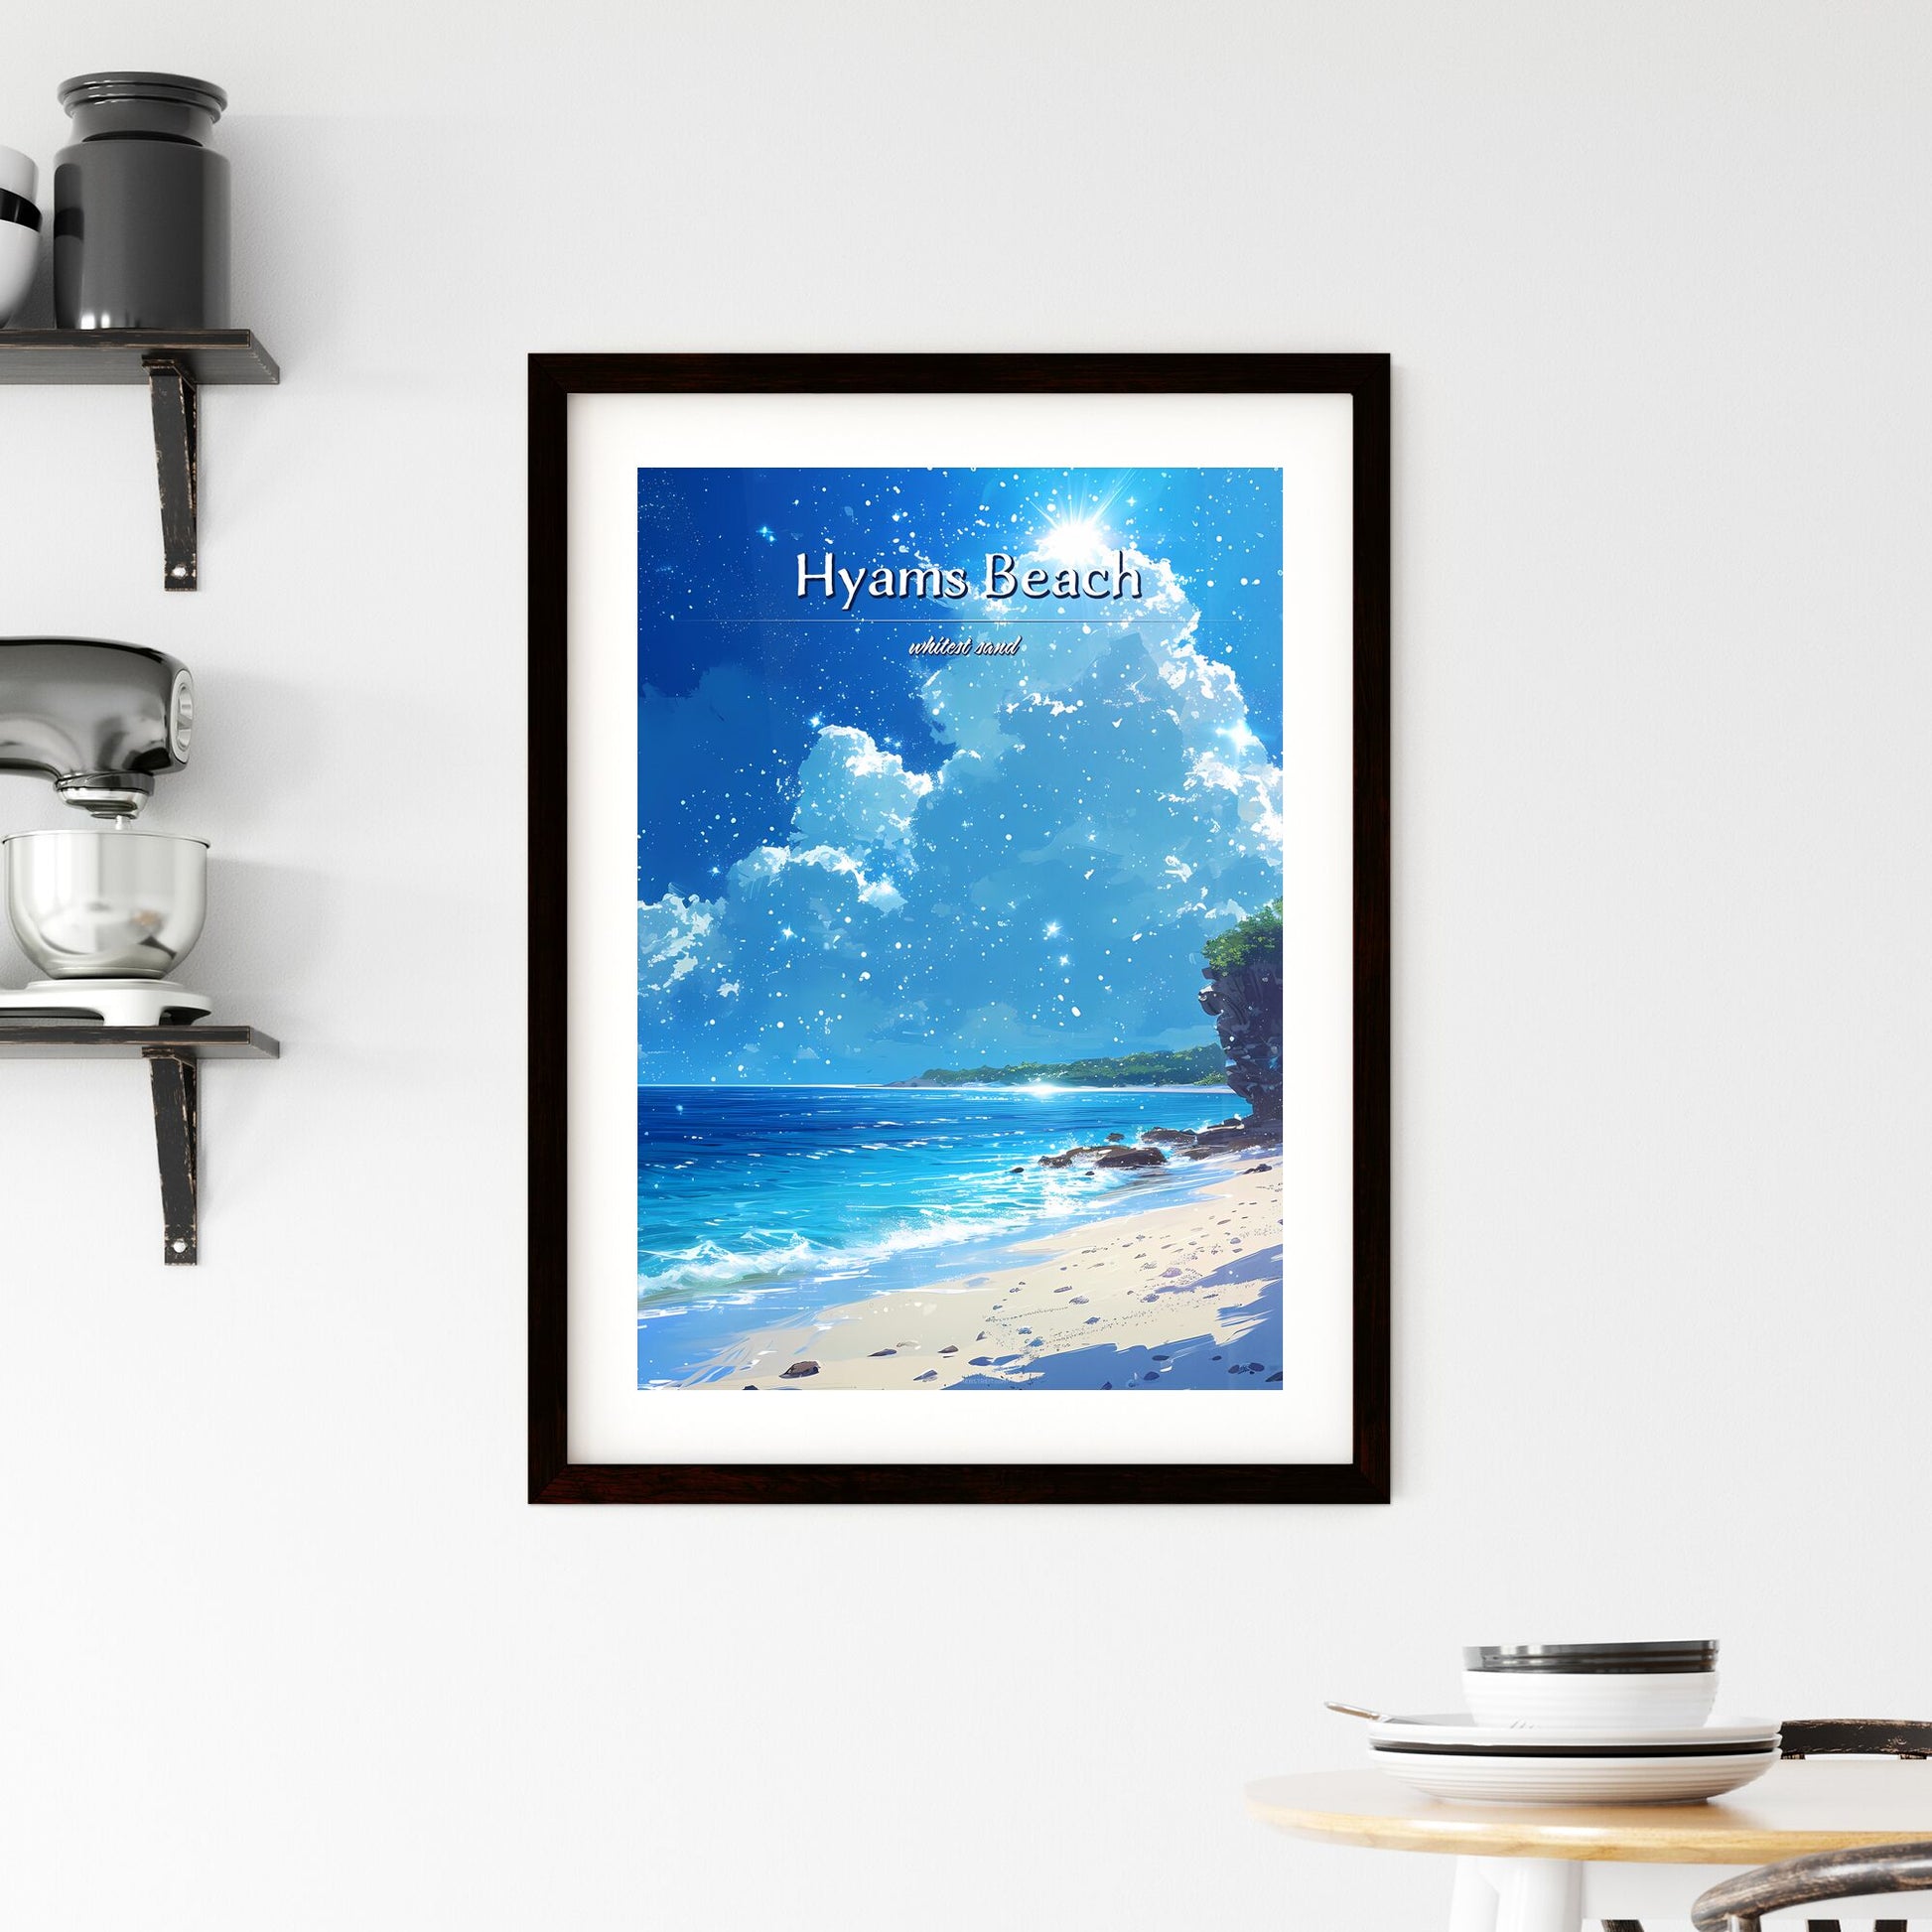 Hyams Beach - Art print of a beach with a cliff and trees Default Title